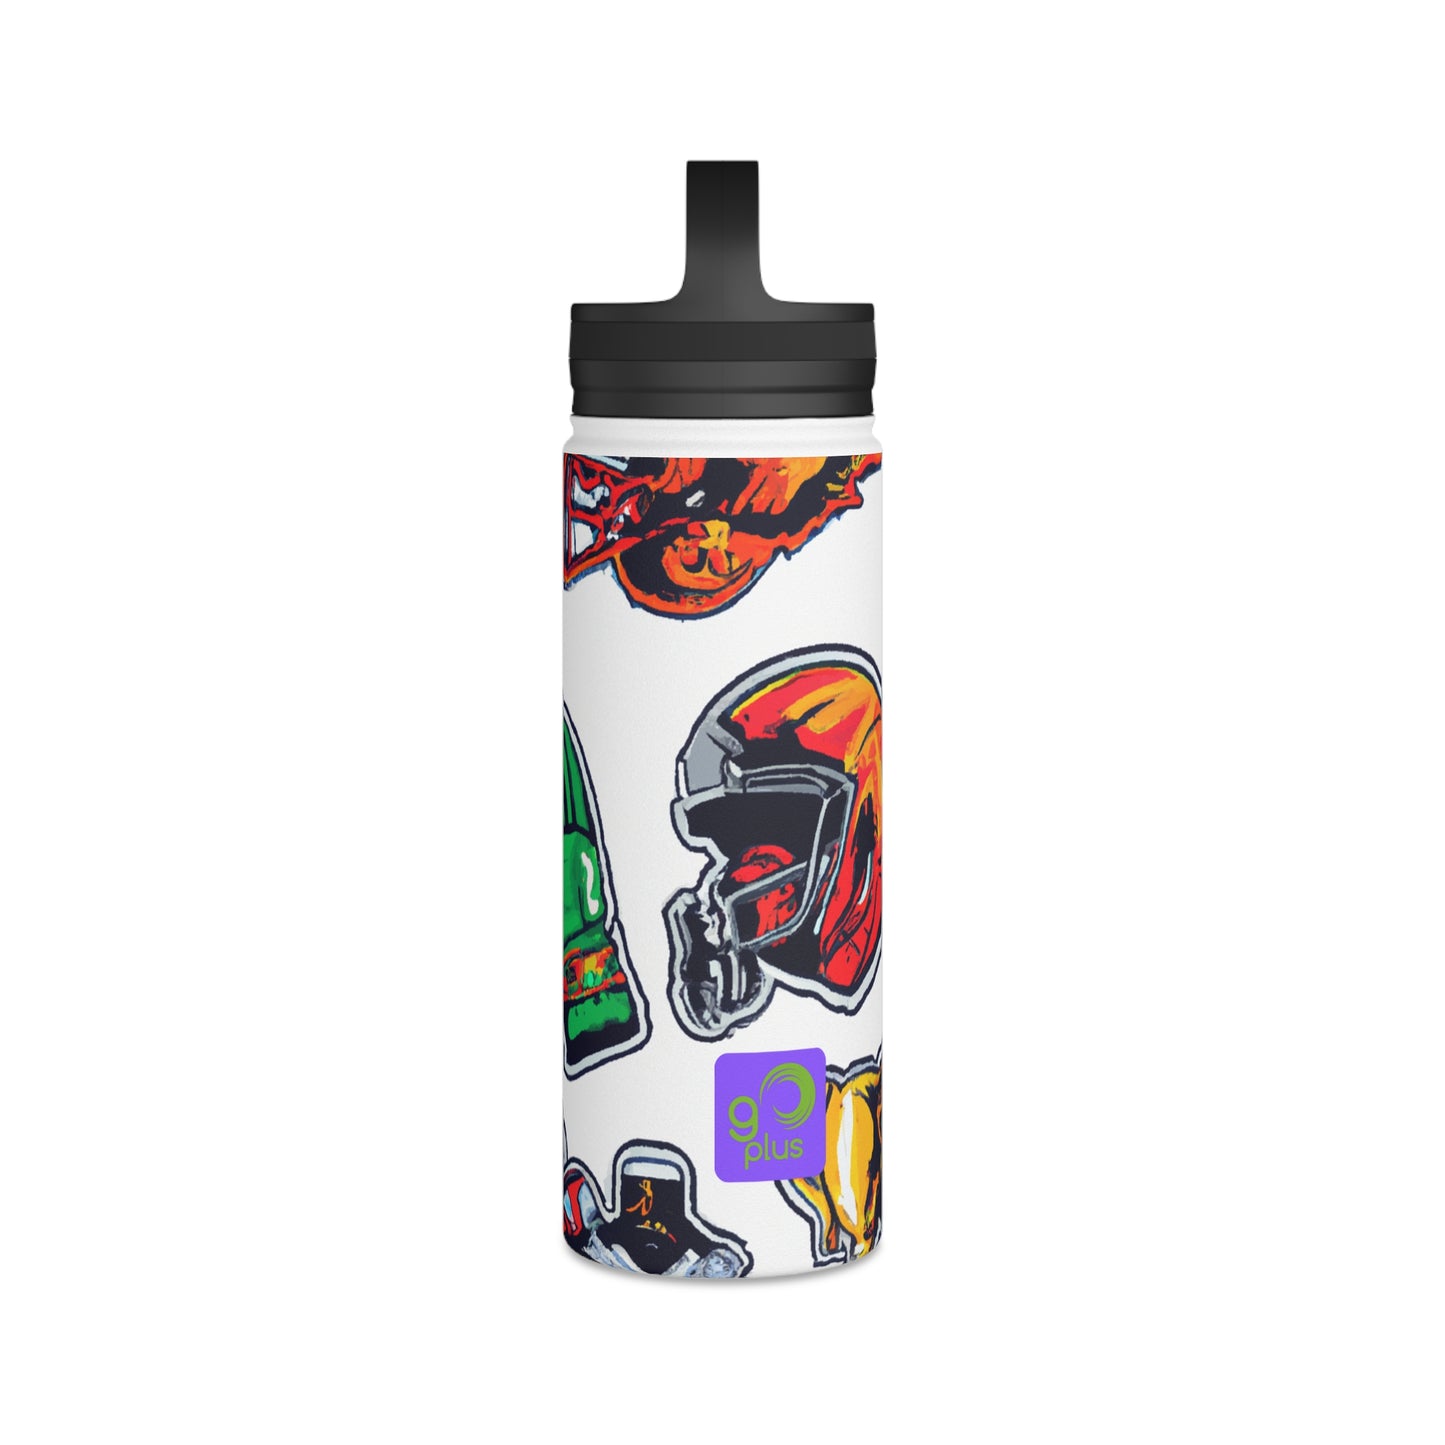 "My Sporting Masterpiece: Designing a Dramatic Display of My Favorite Sport" - Go Plus Stainless Steel Water Bottle, Handle Lid